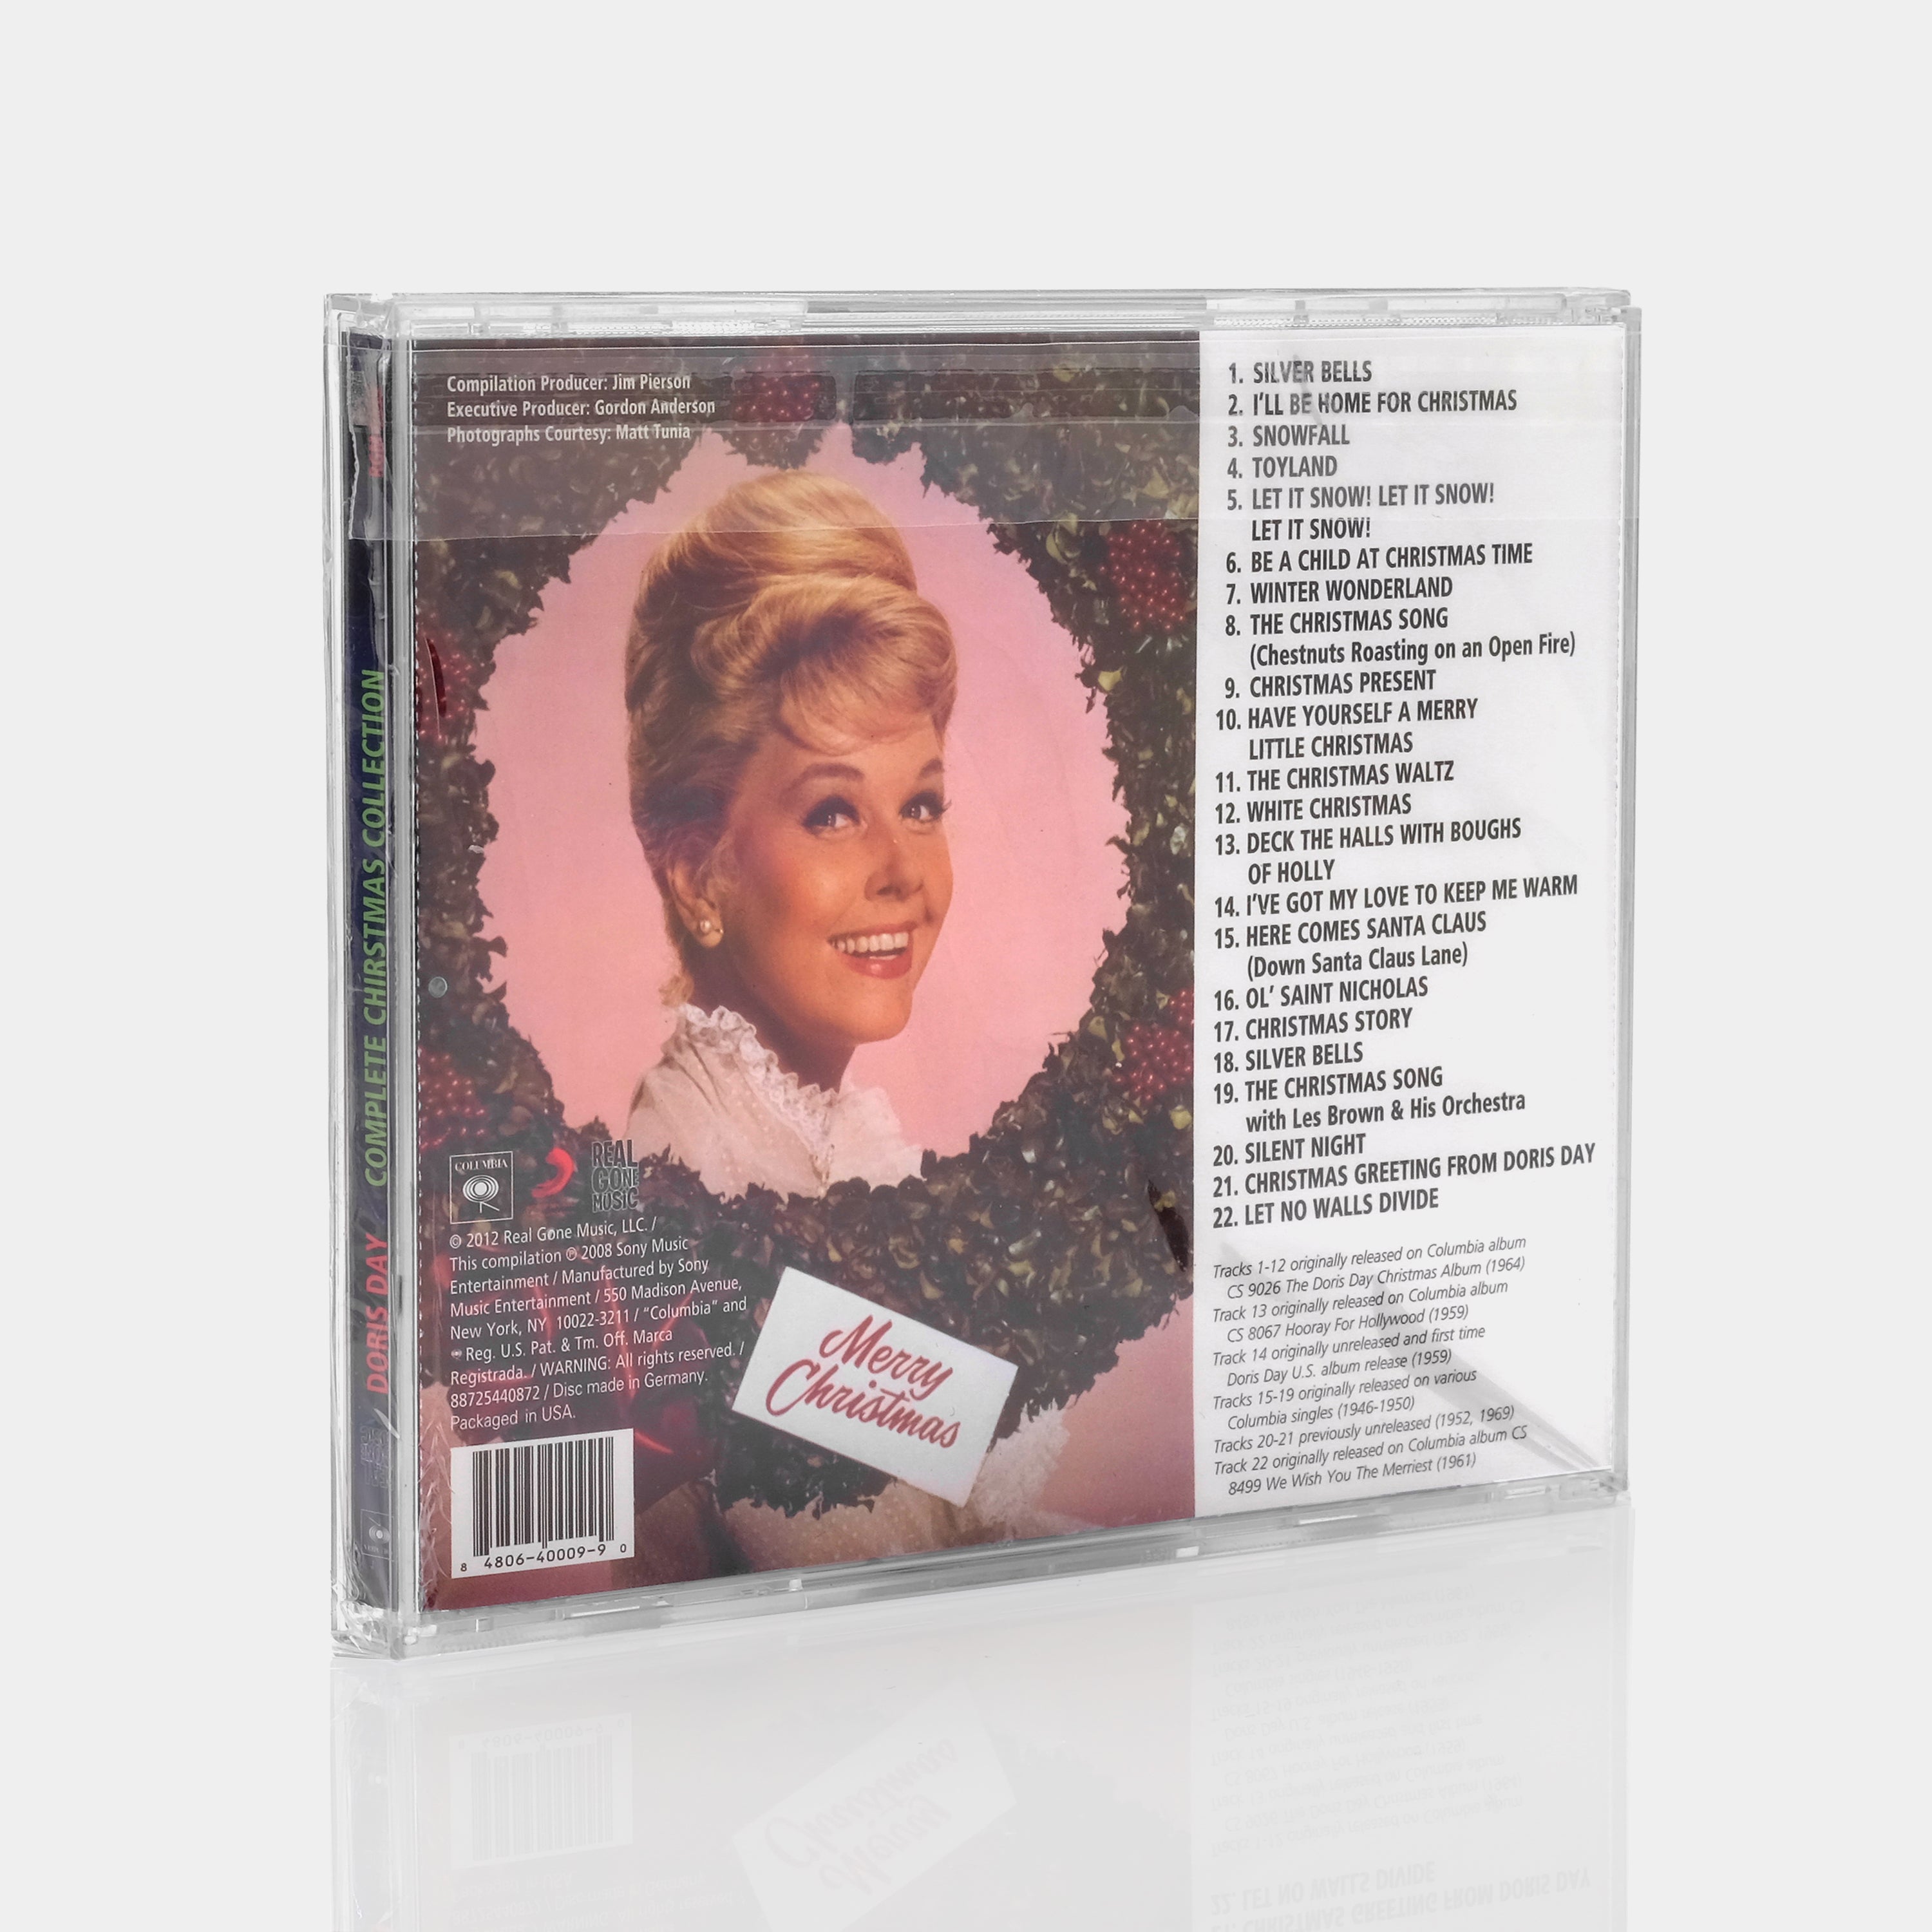 Doris Day - Complete Christmas Collection CD